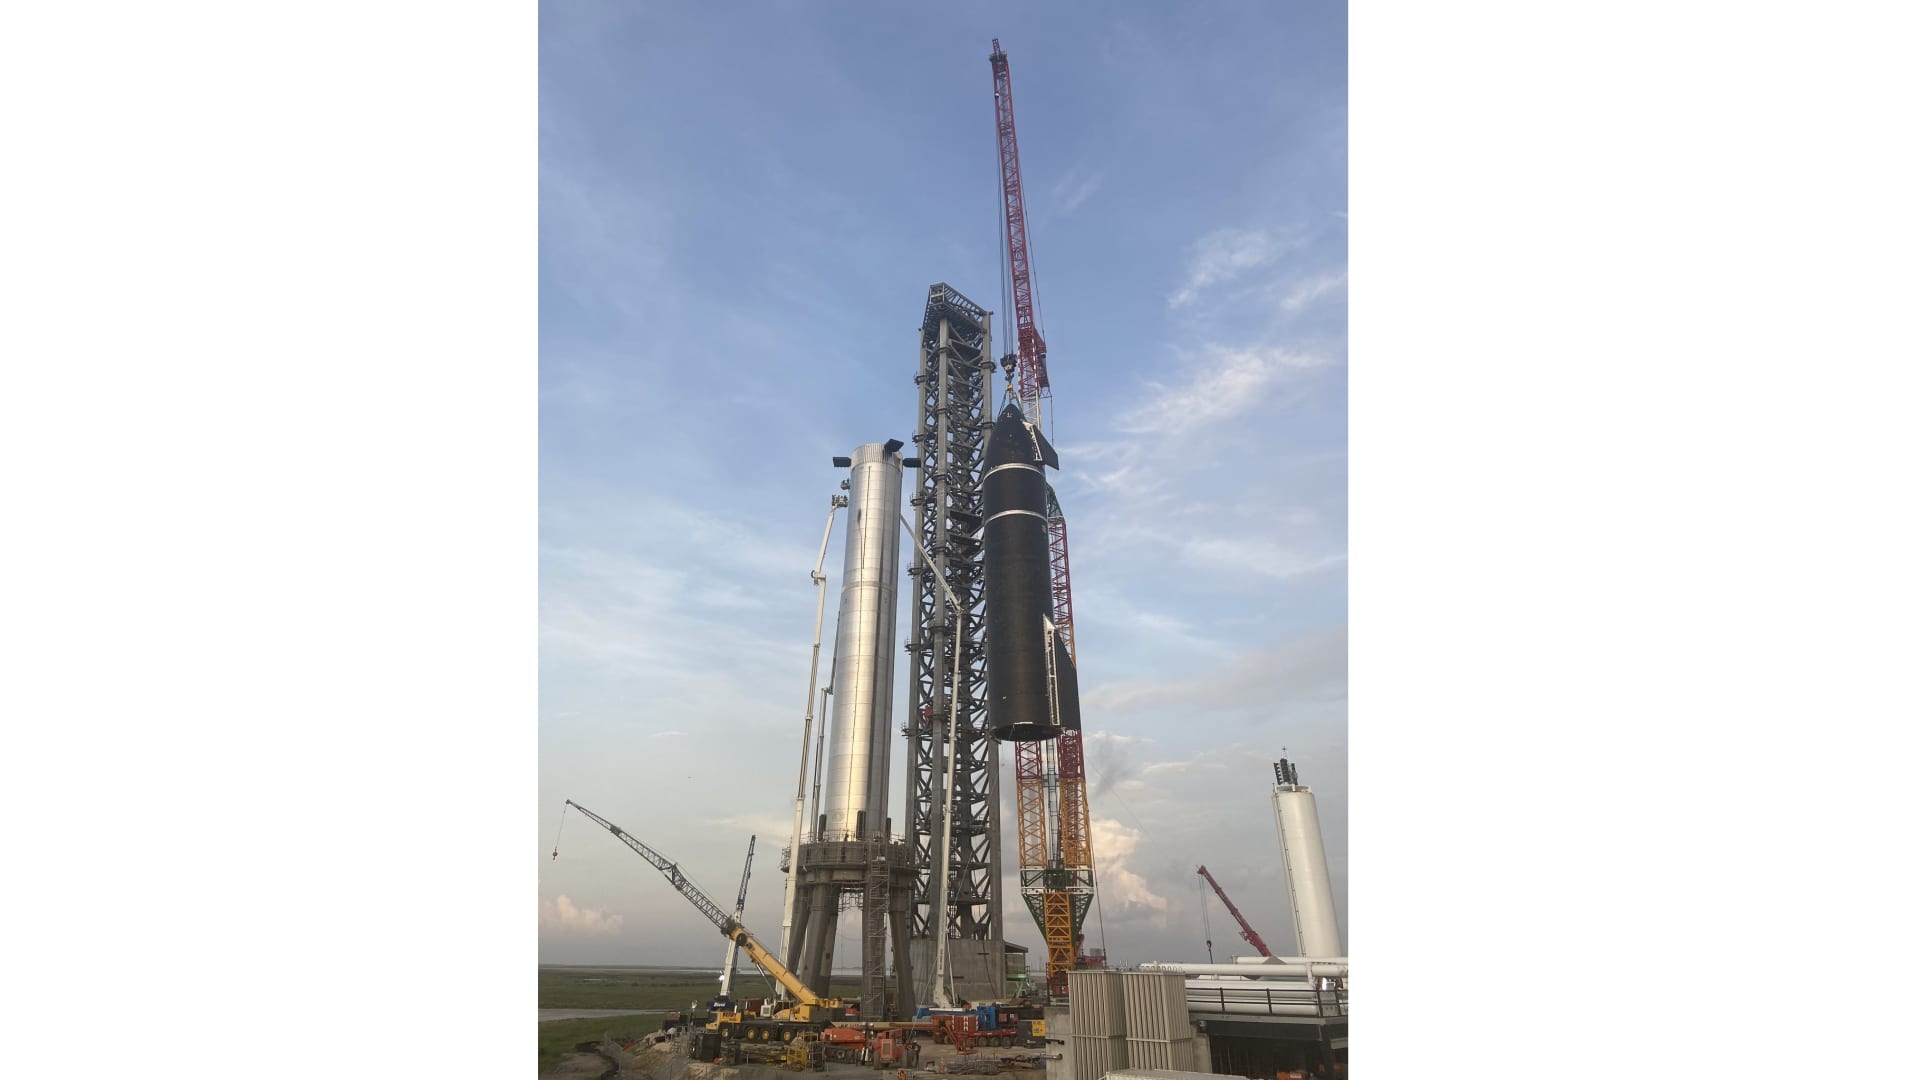 A SpaceX crane lifts Starship prototype 20 on top of Super Heavy rocket Booster 4 during stacking operations on August 6, 2021.